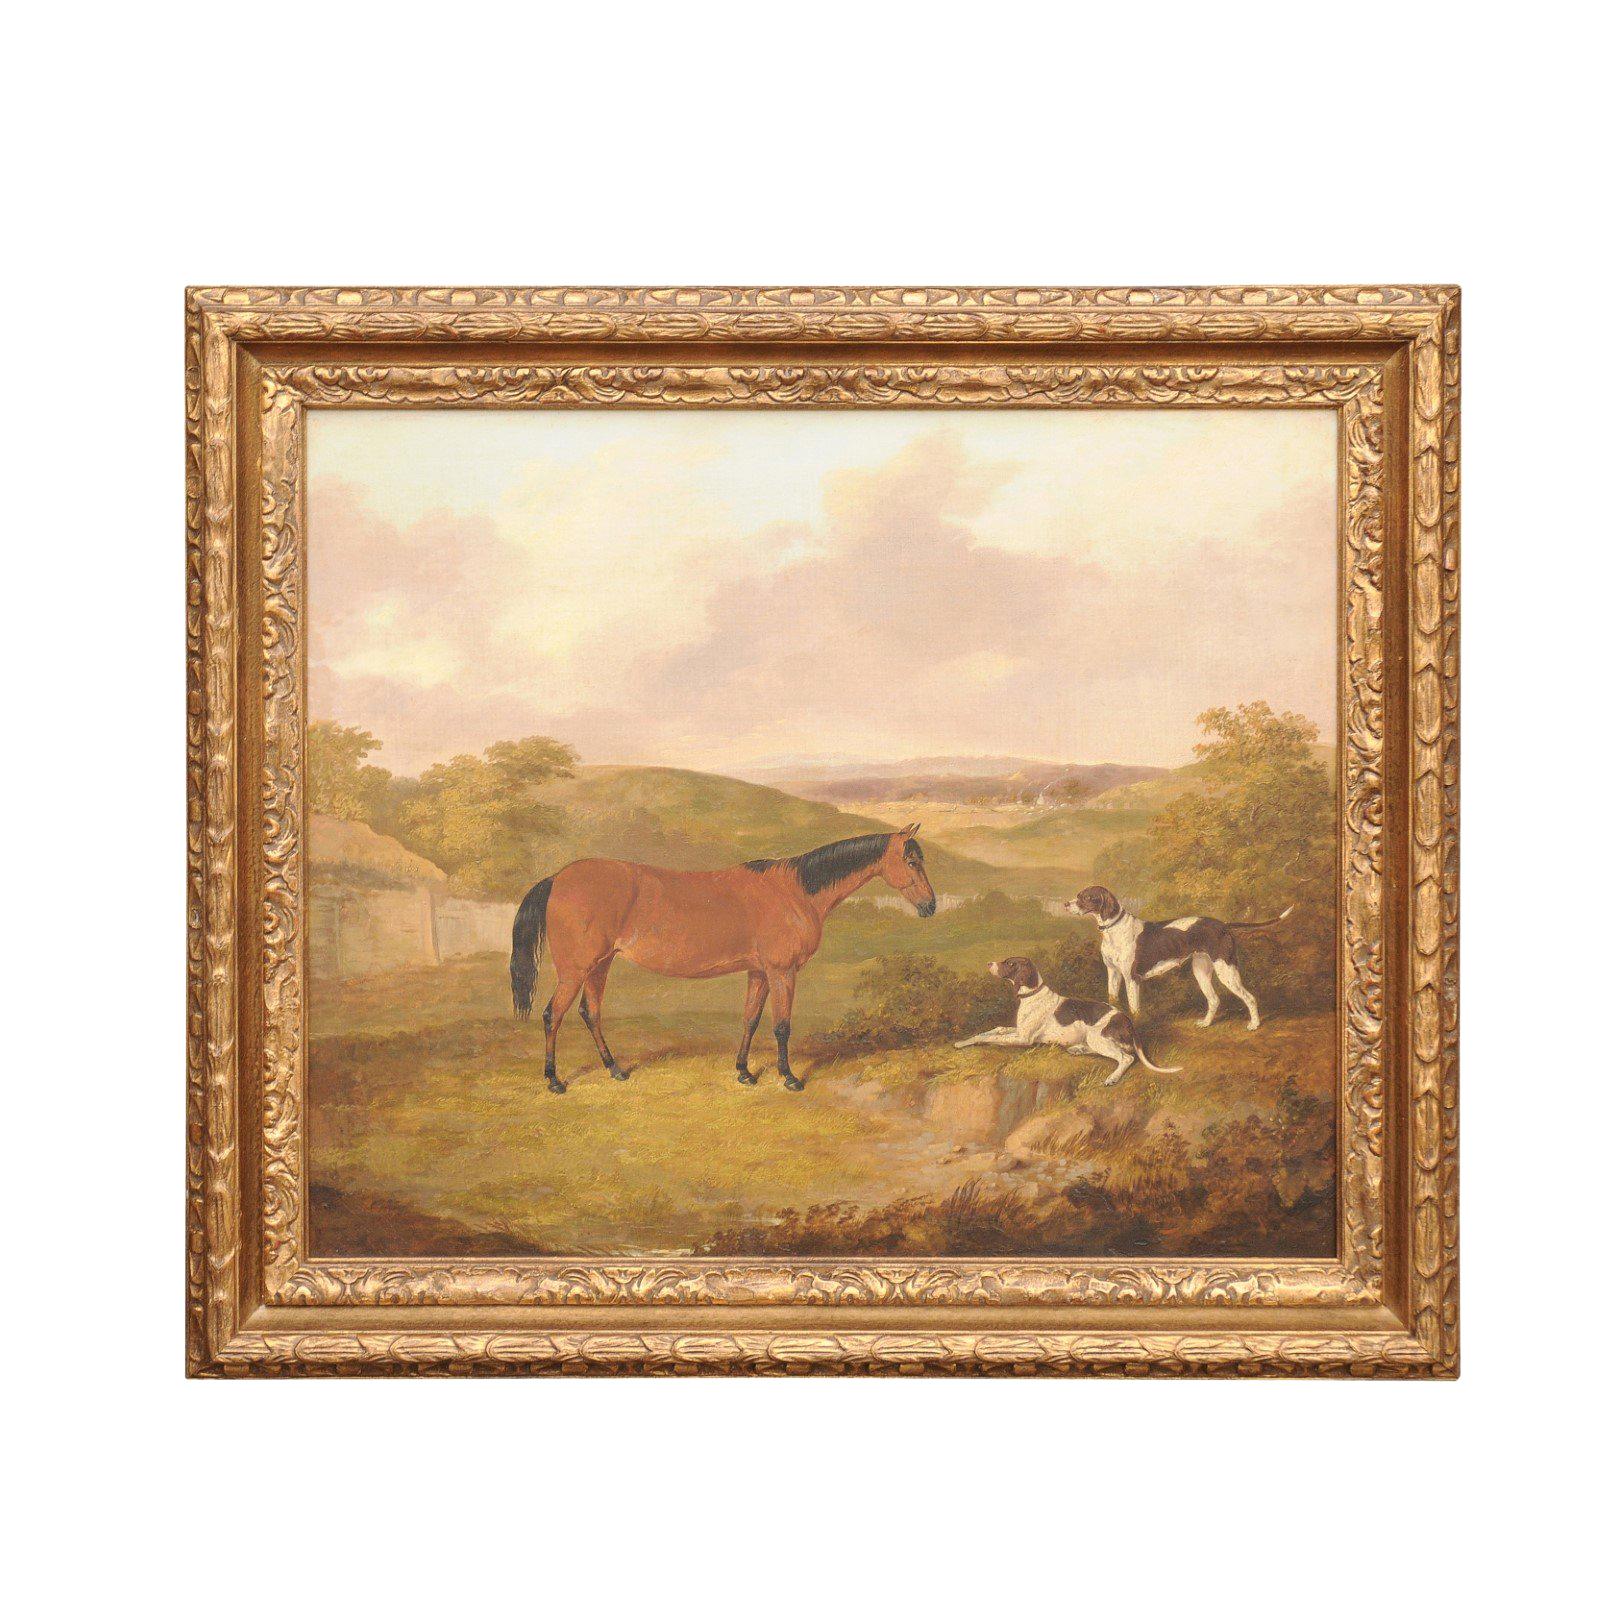 English Thomas Bretland 1850s Framed Oil Painting Depicting a Horse with Dogs